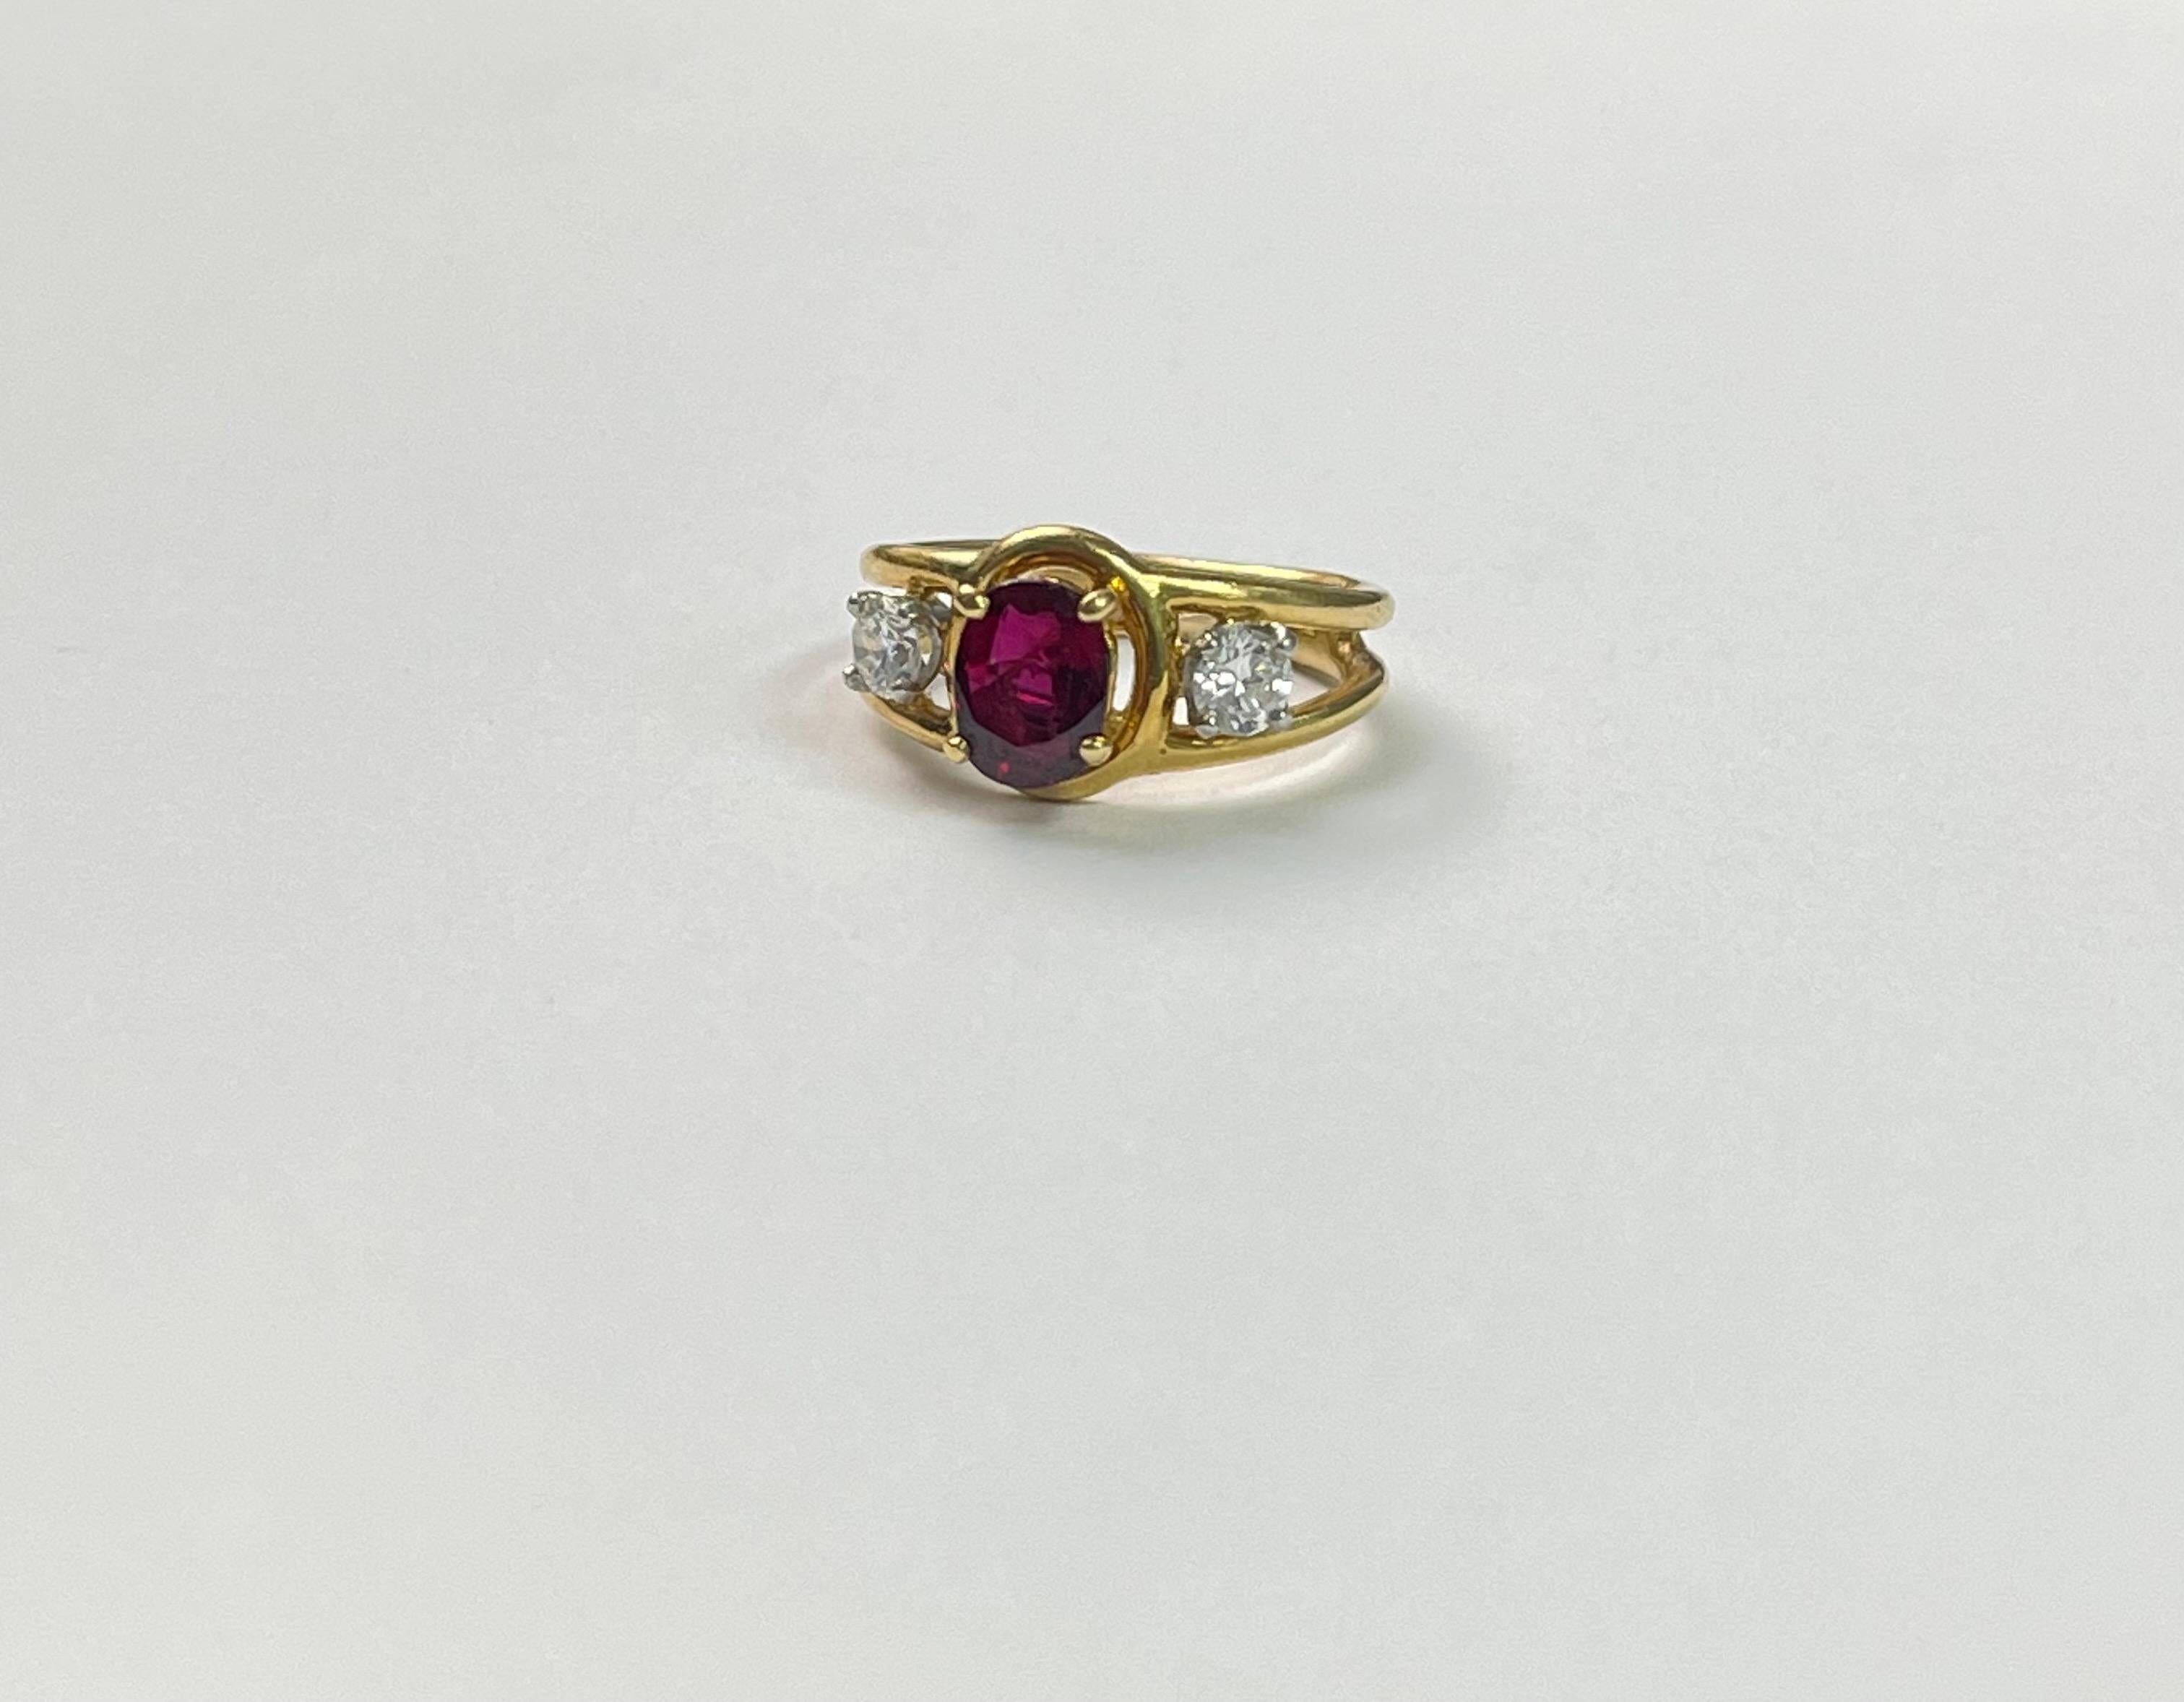  Cartier 1.70 Carat Natural Oval Ruby Heat and White Diamond Ring in 18 Karat. 3